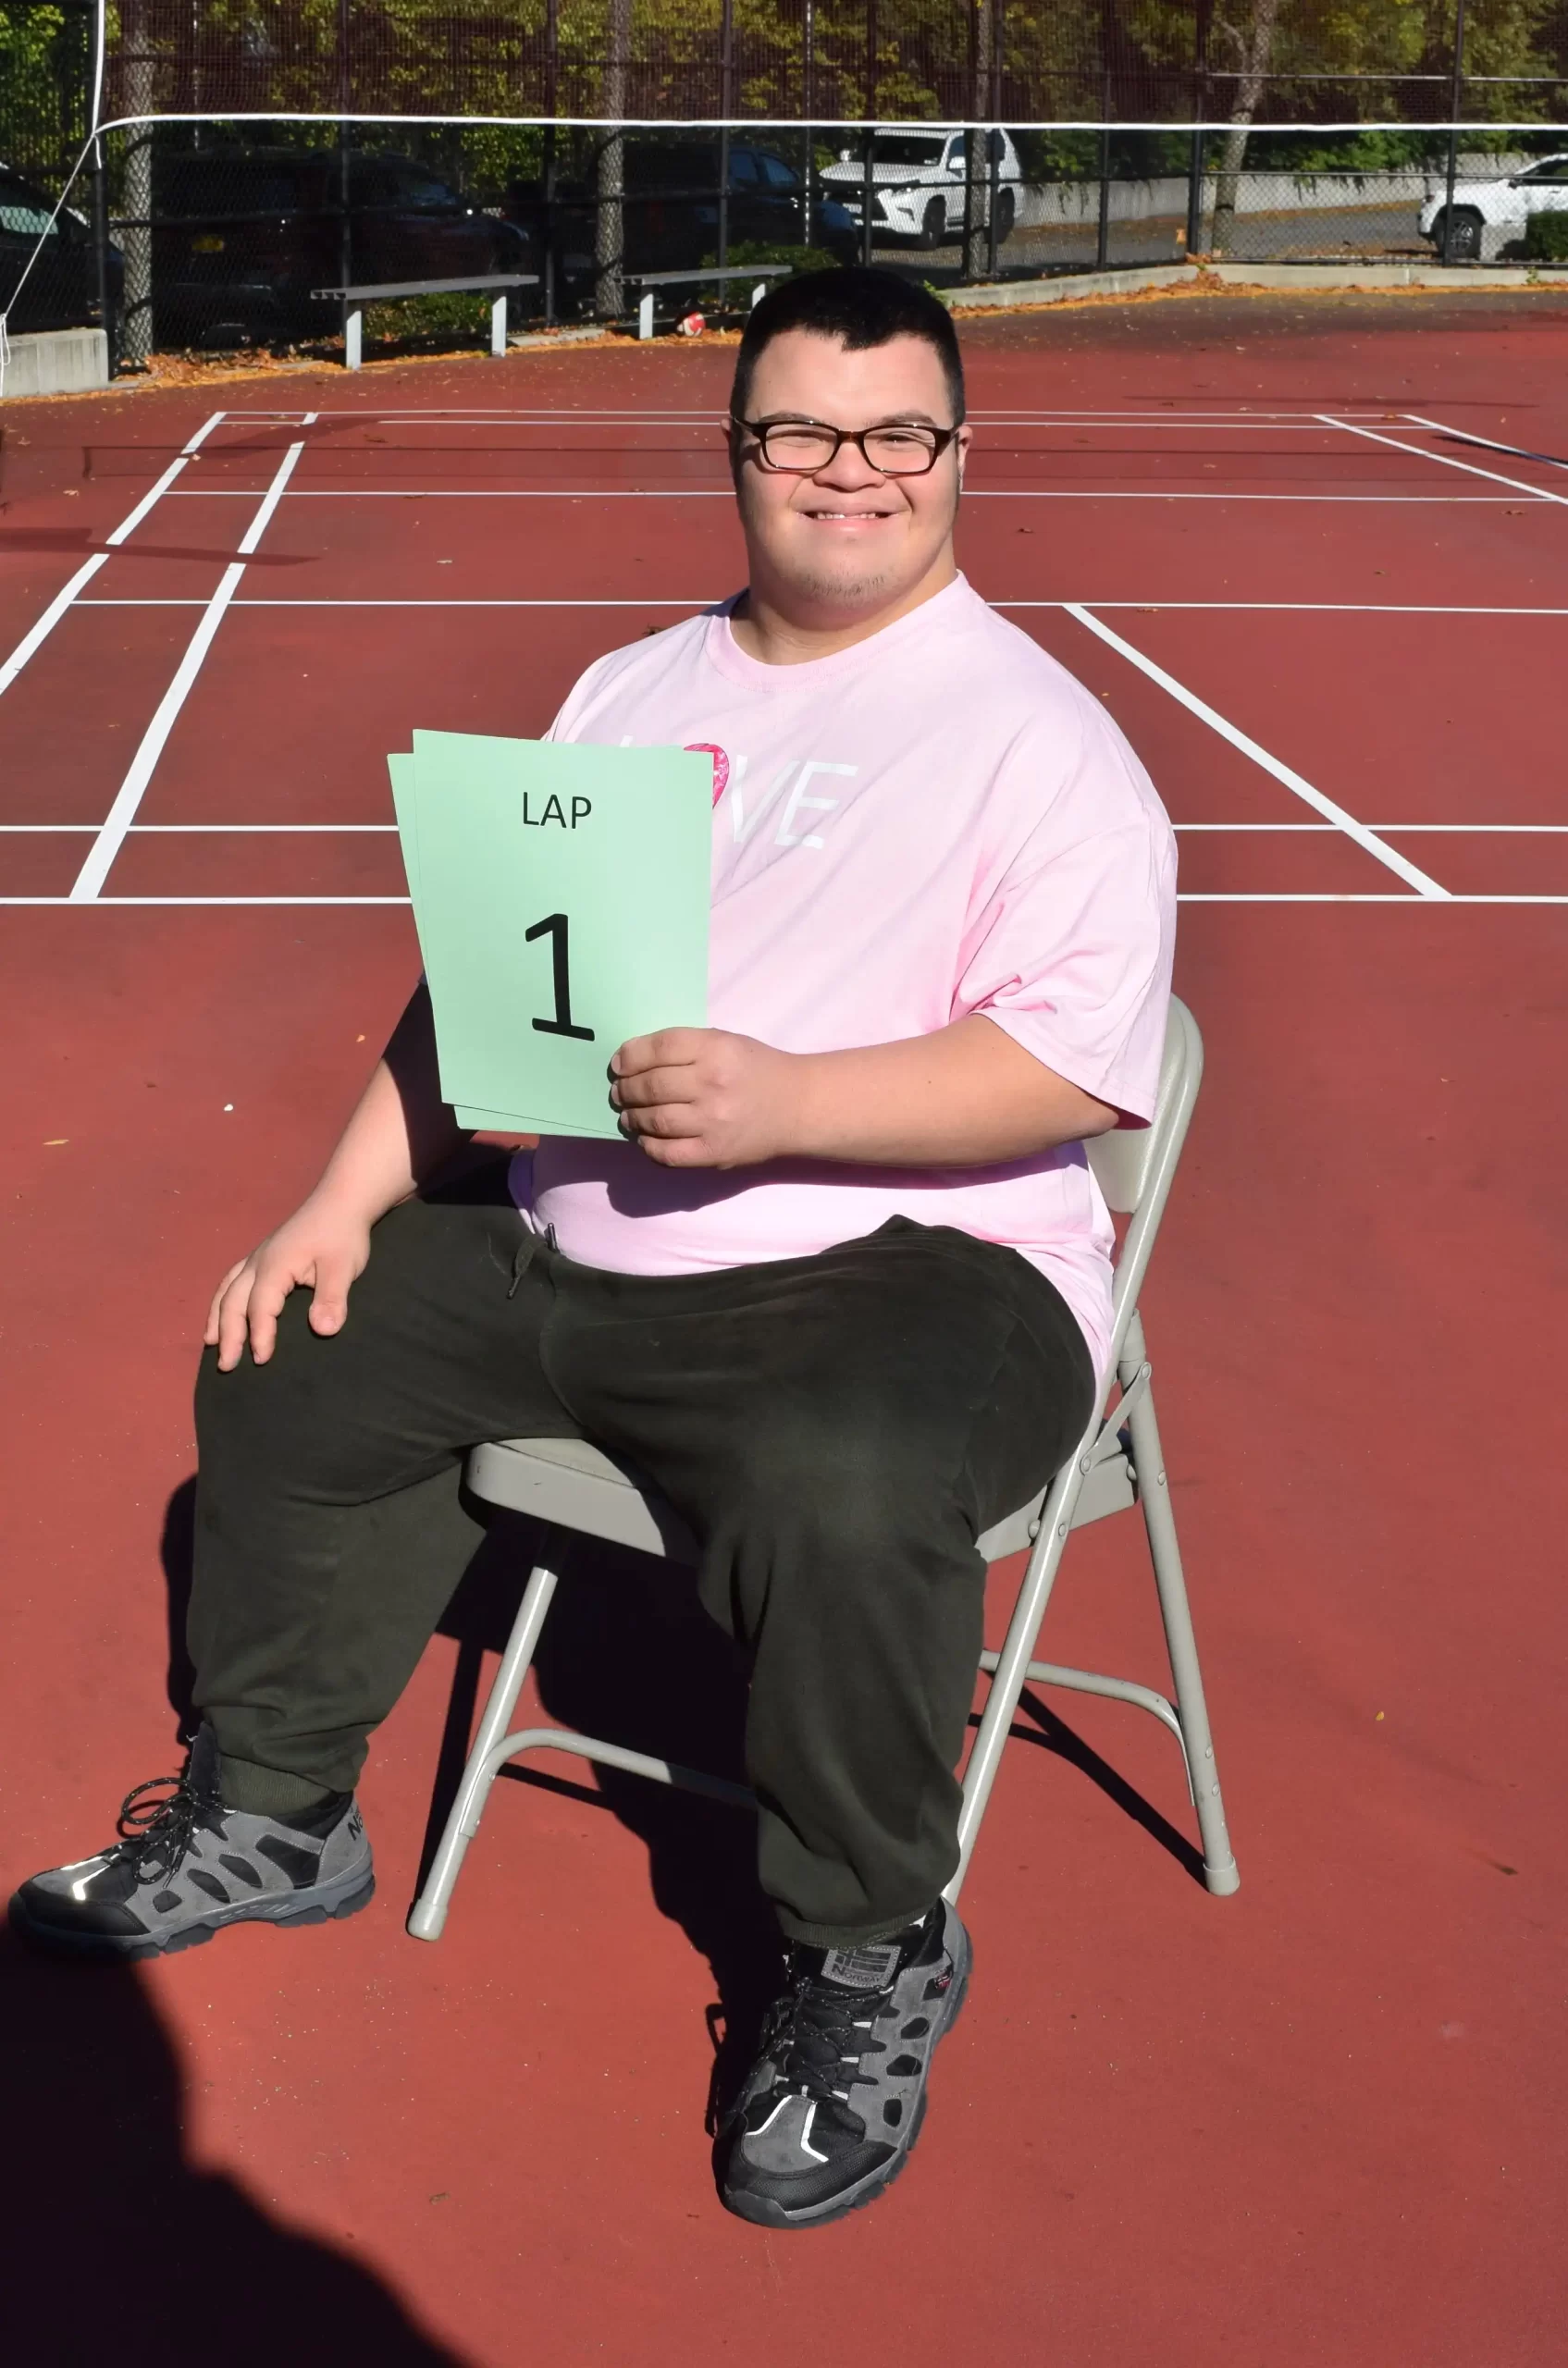 Rayan sitting in a chair wearing a short sleeve pink shirt, helping students keep track of their laps.